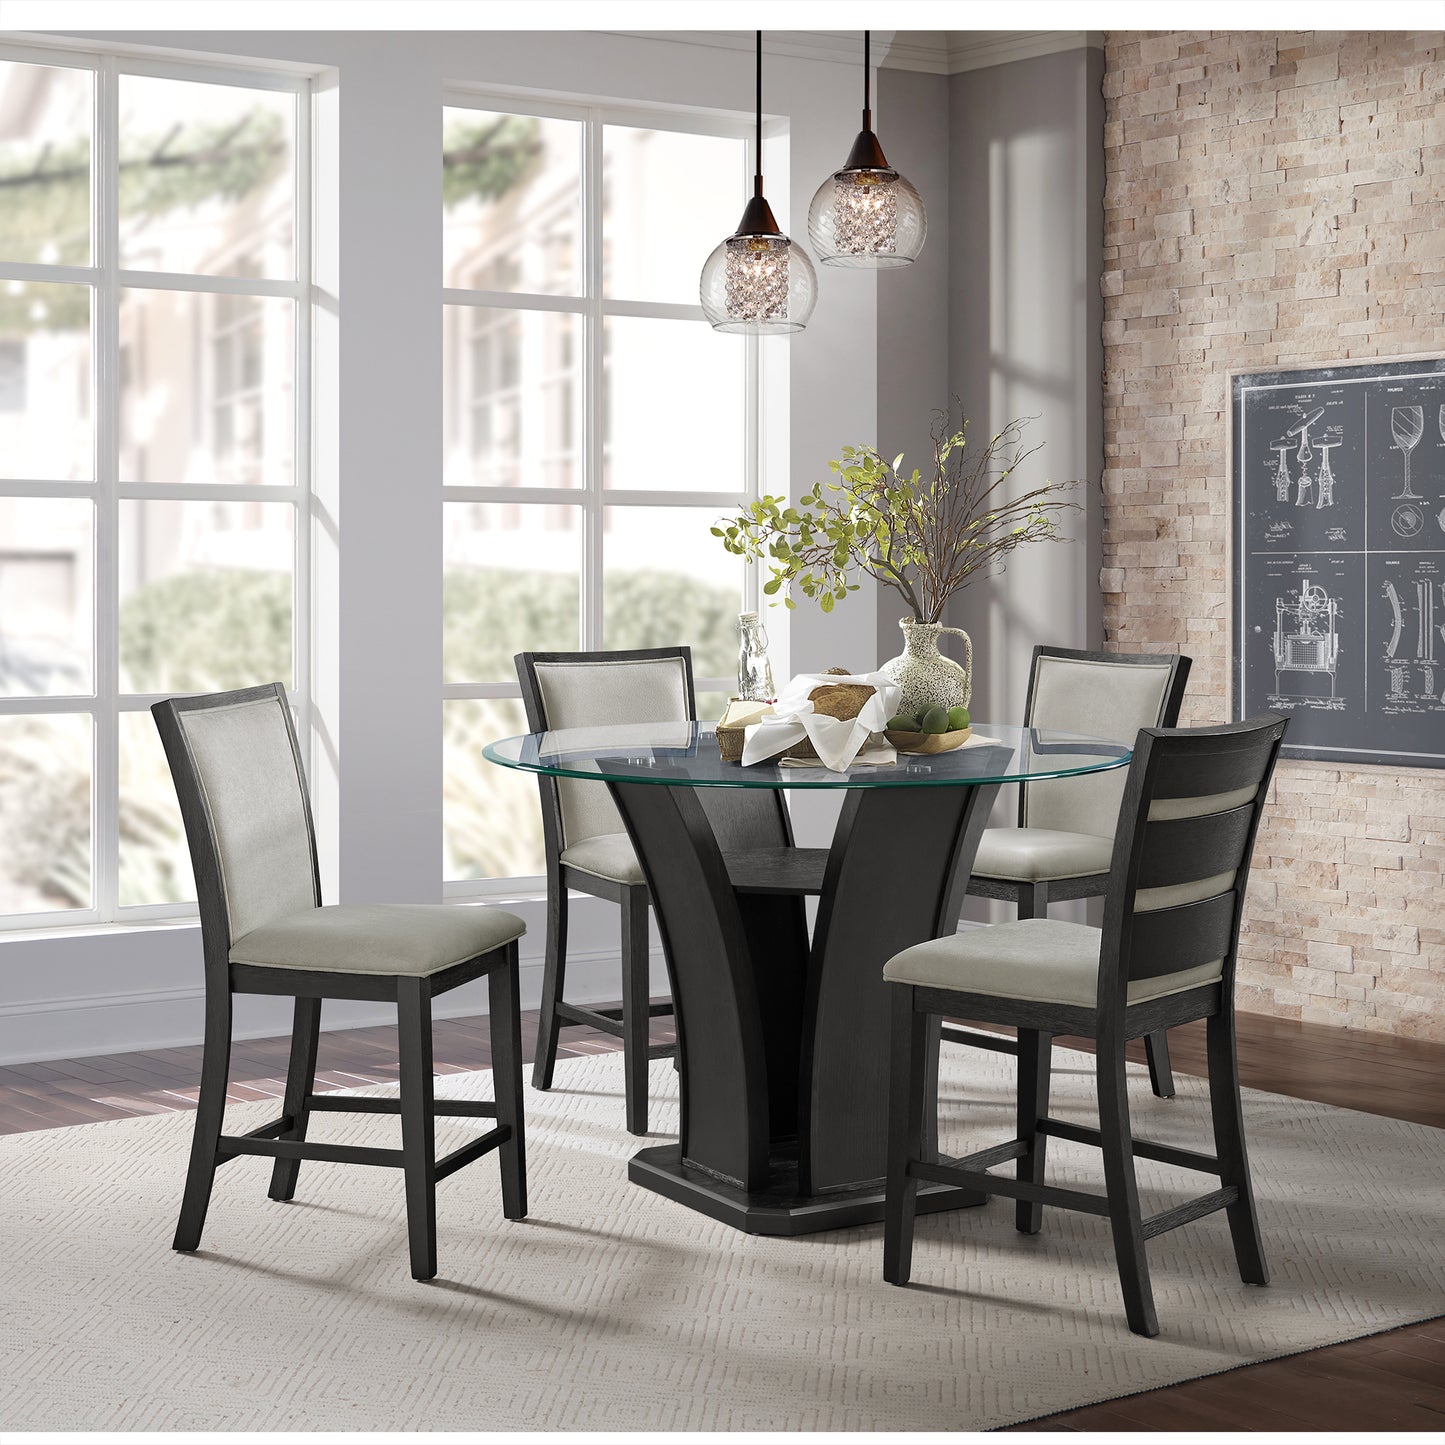 Cosmopolitan 5 Piece Round Dining Set with Slat Back Chairs